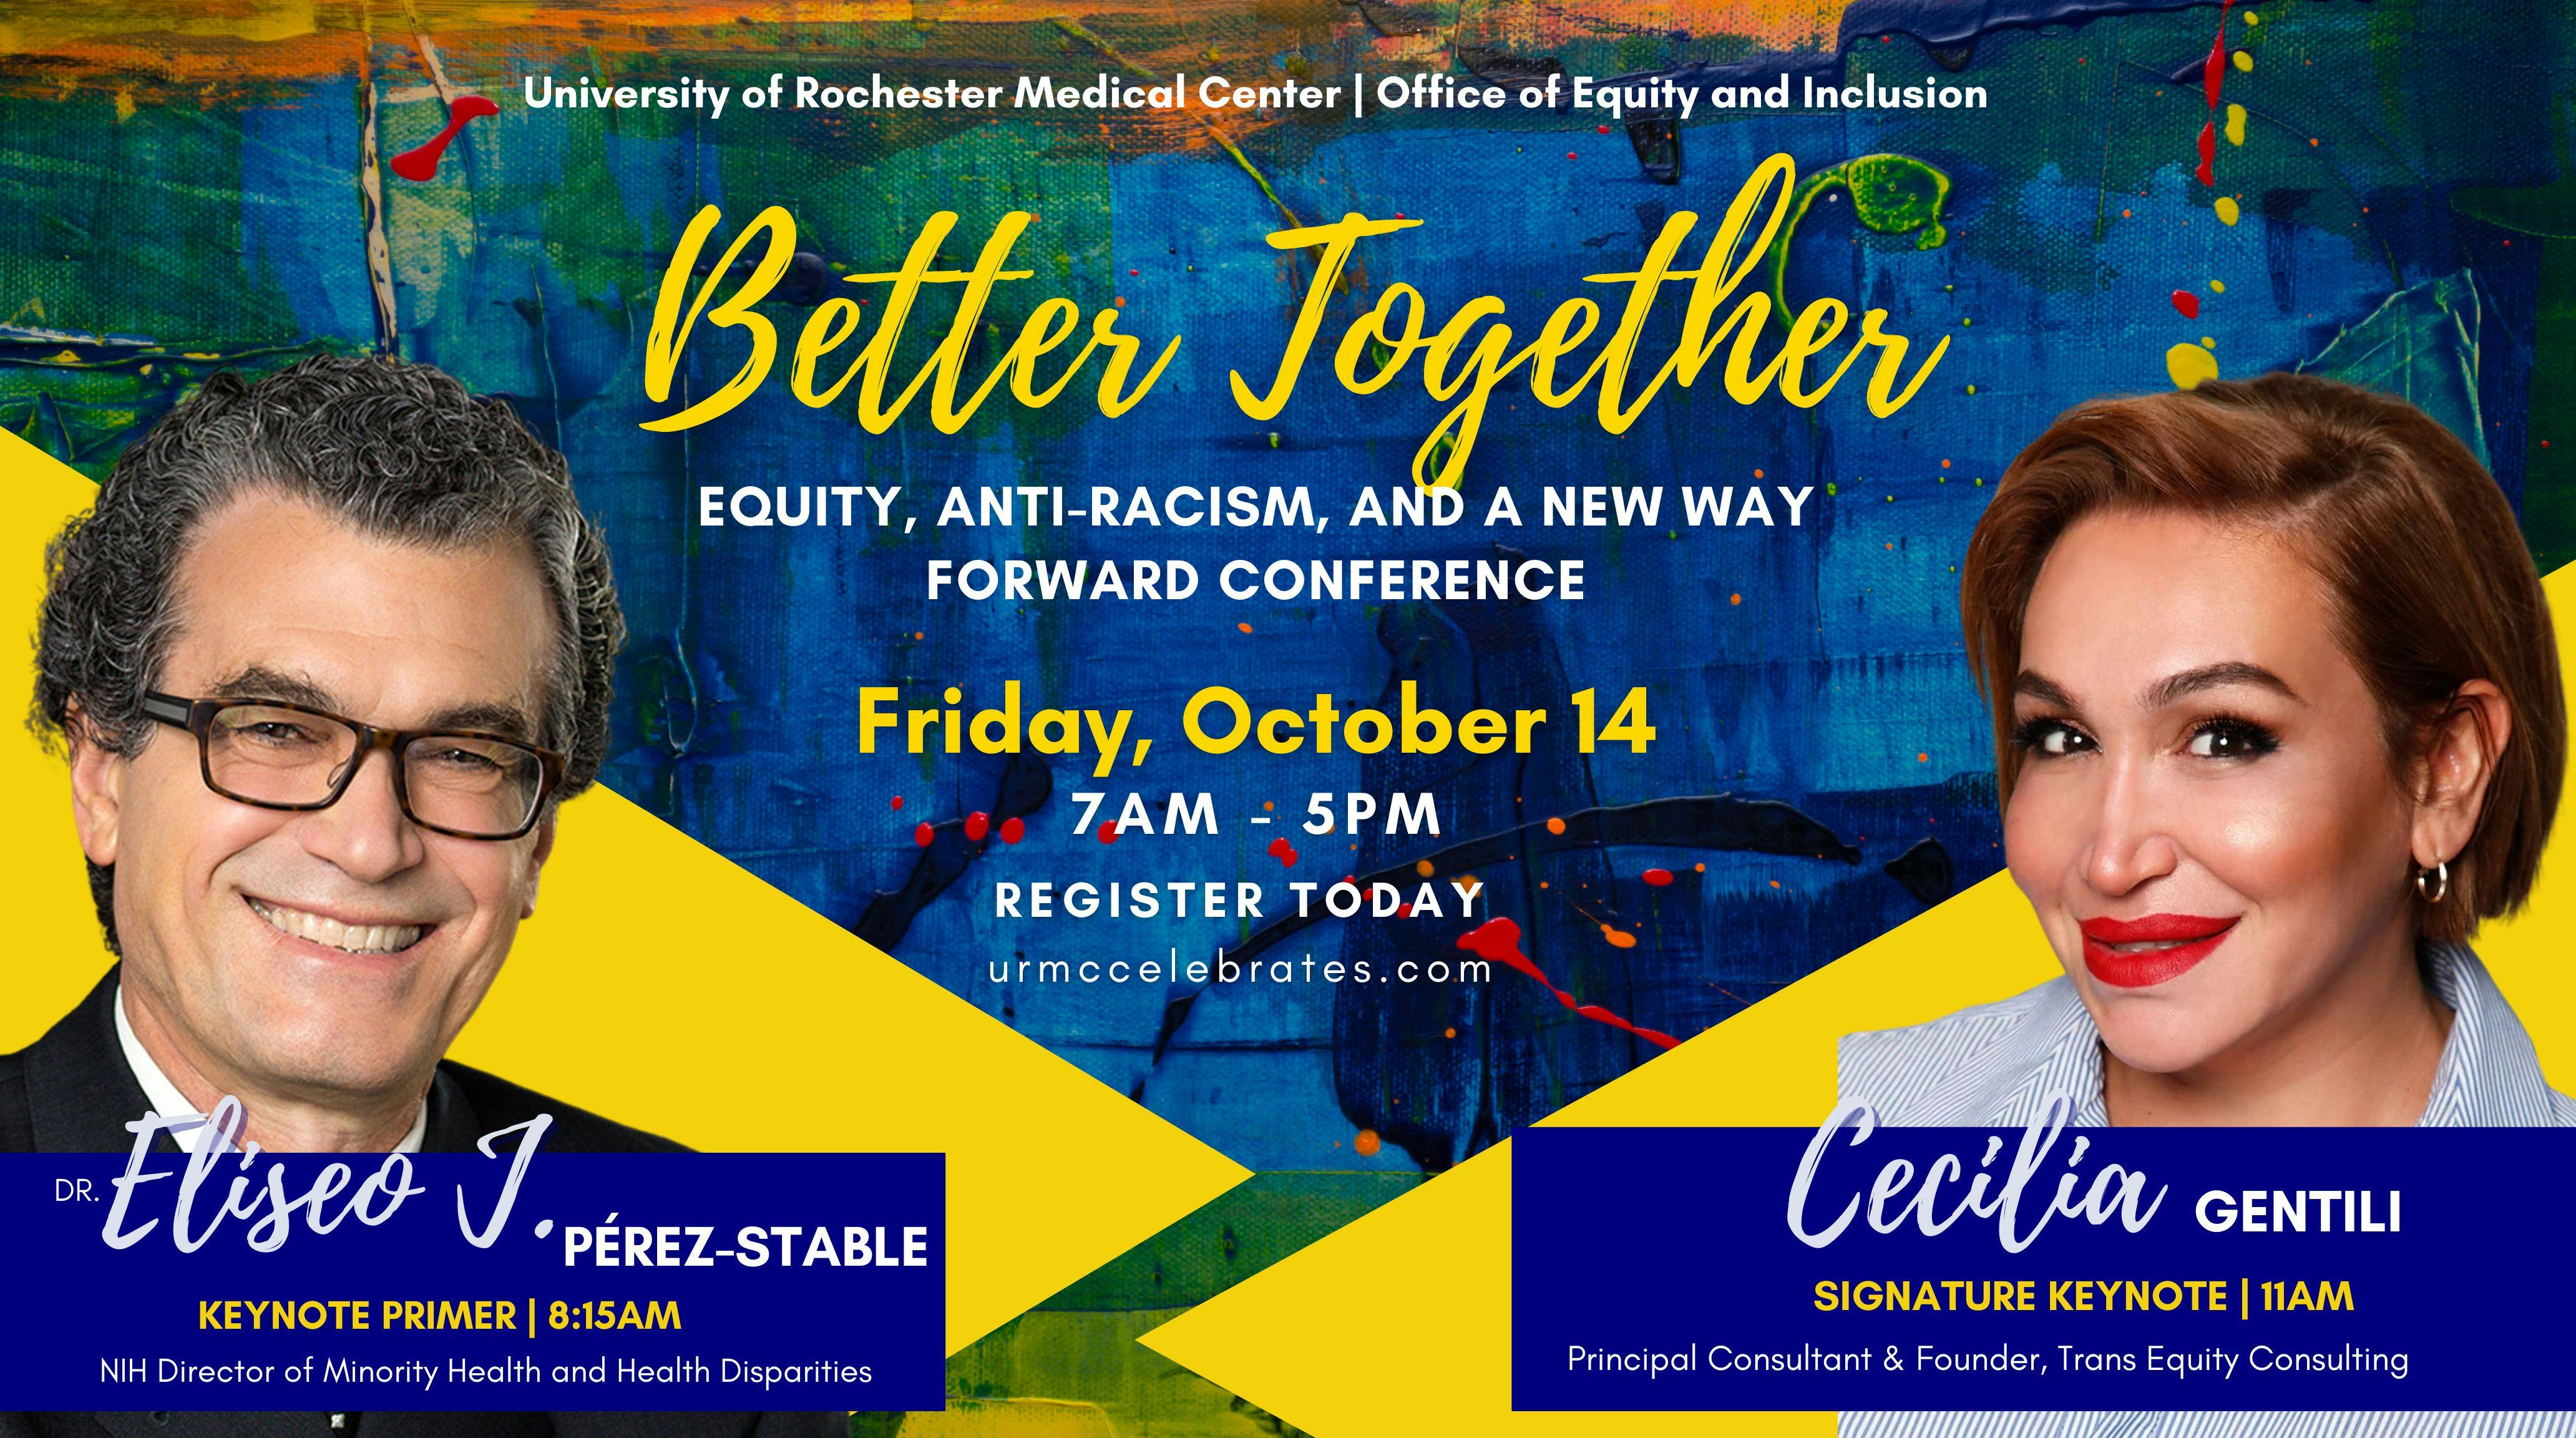 Save the Date for the Better Together Conference